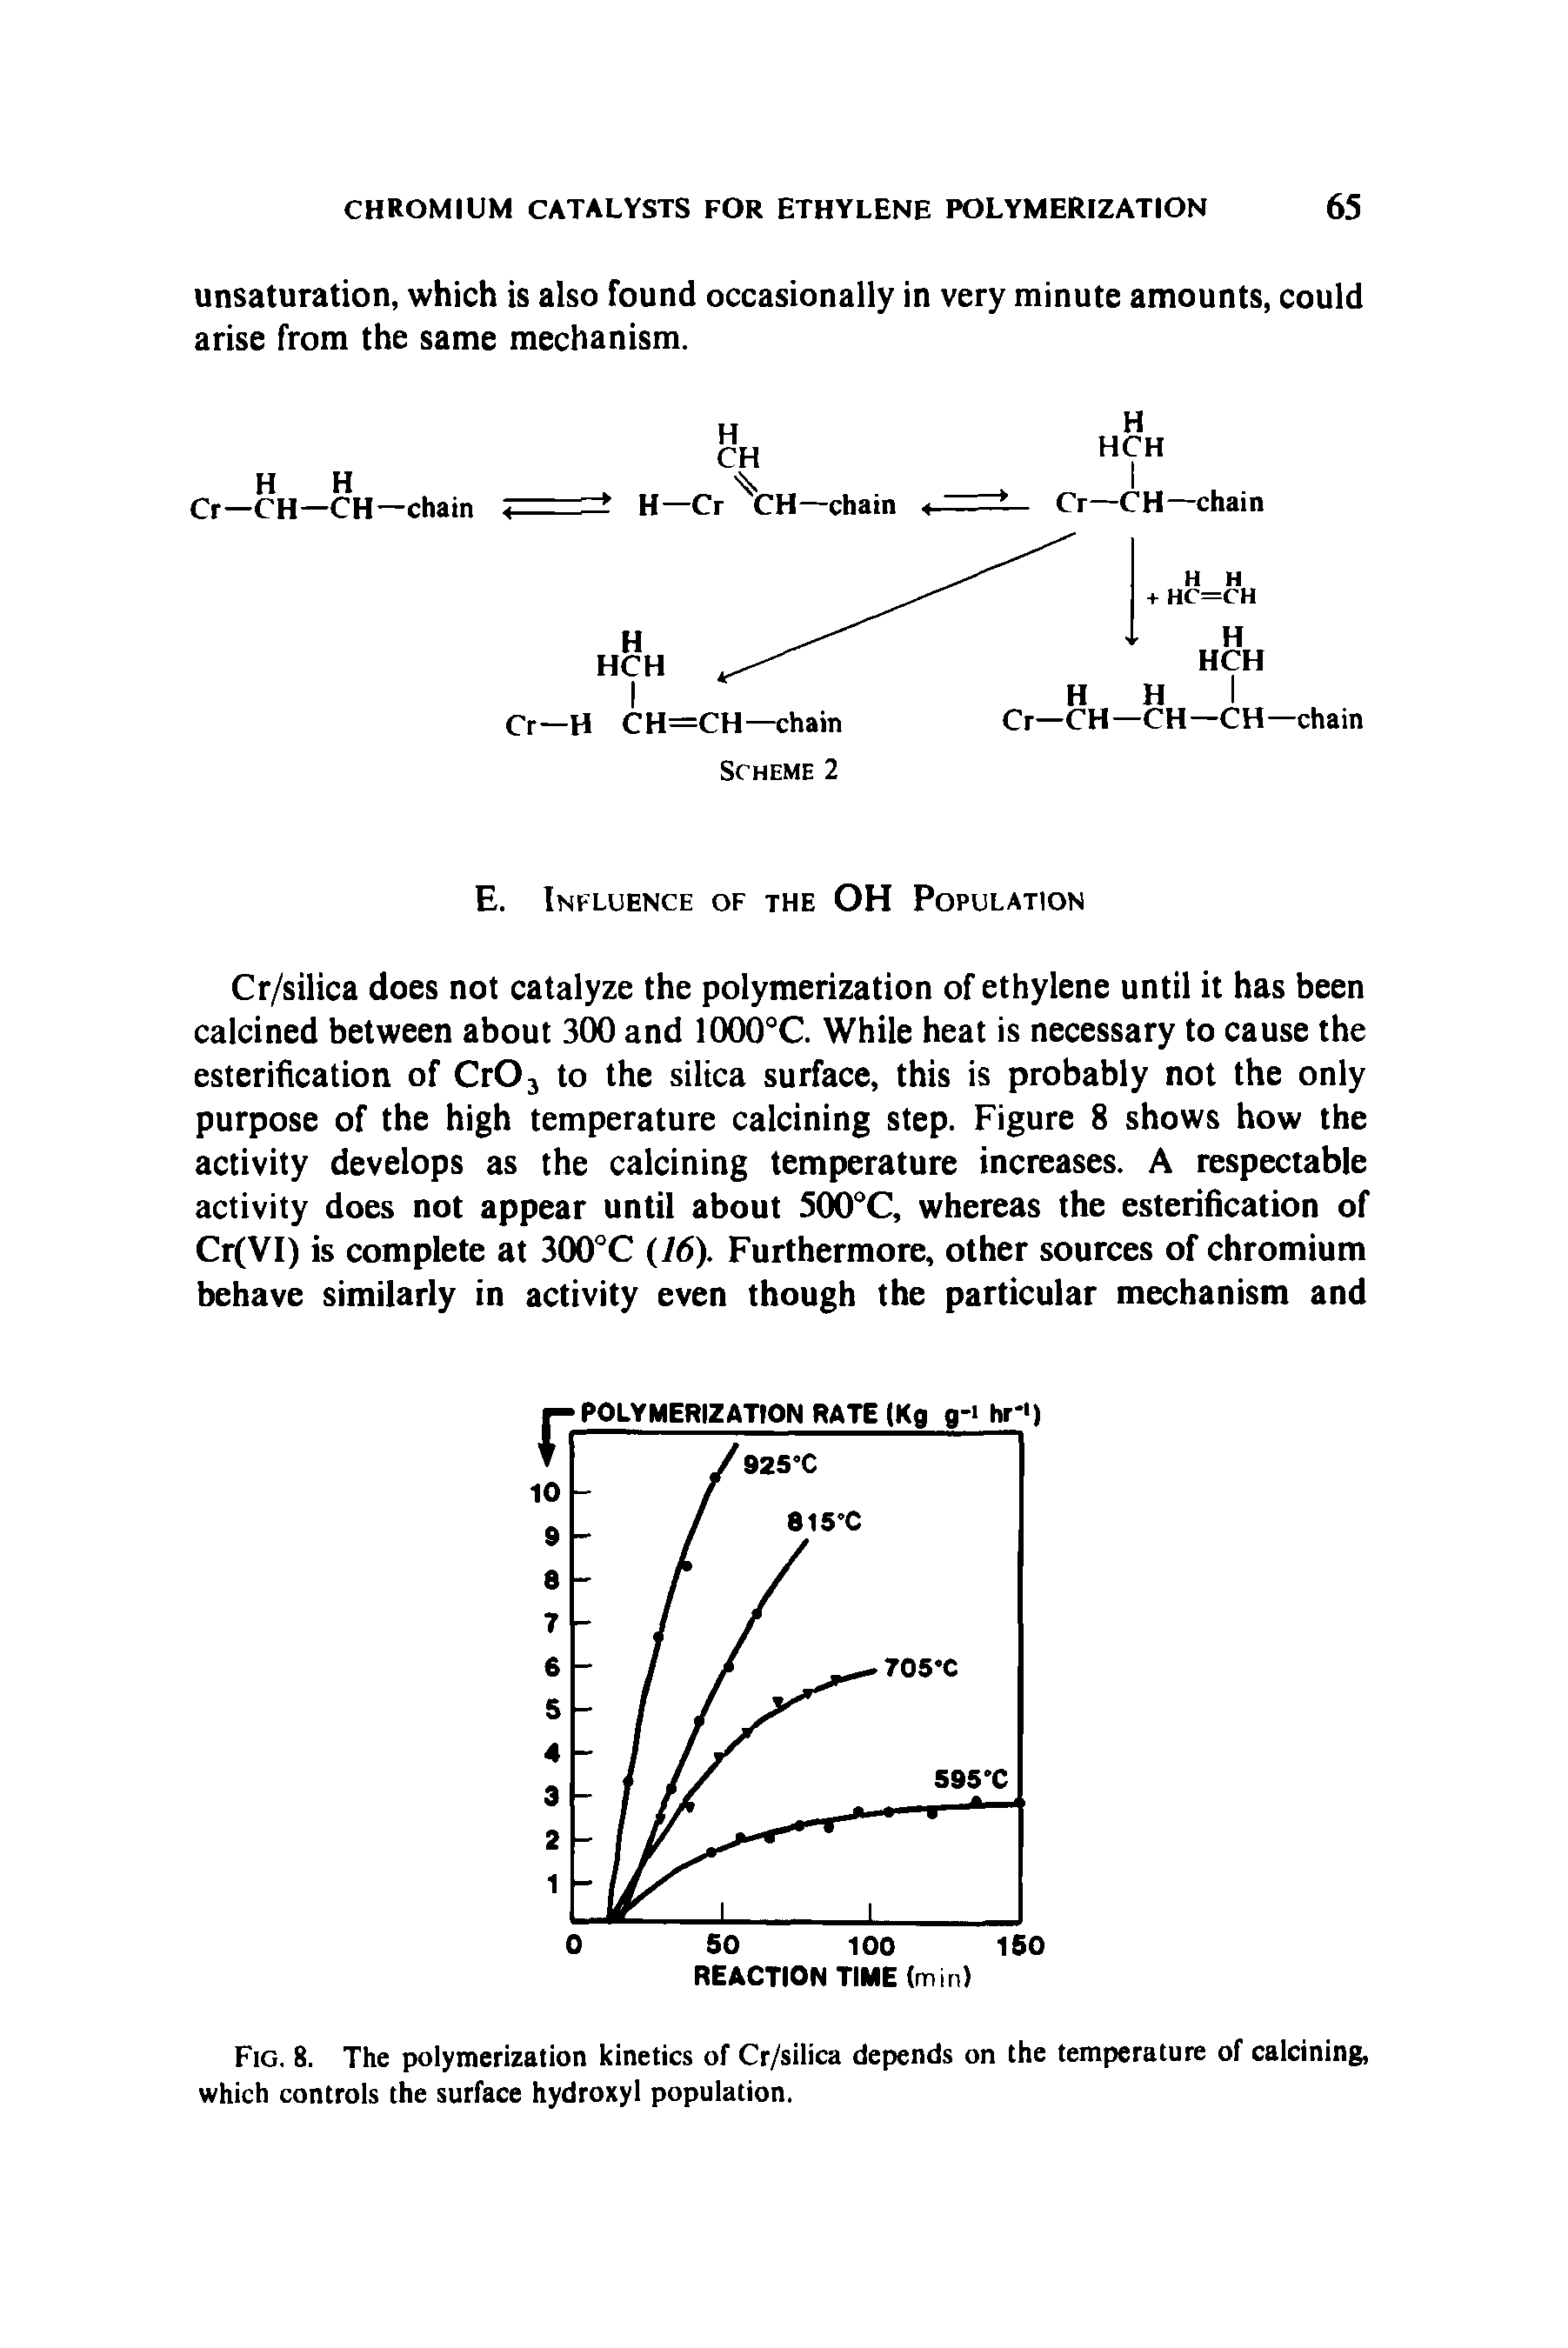 Fig. 8. The polymerization kinetics of Cr/silica depends on the temperature of calcining, which controls the surface hydroxyl population.